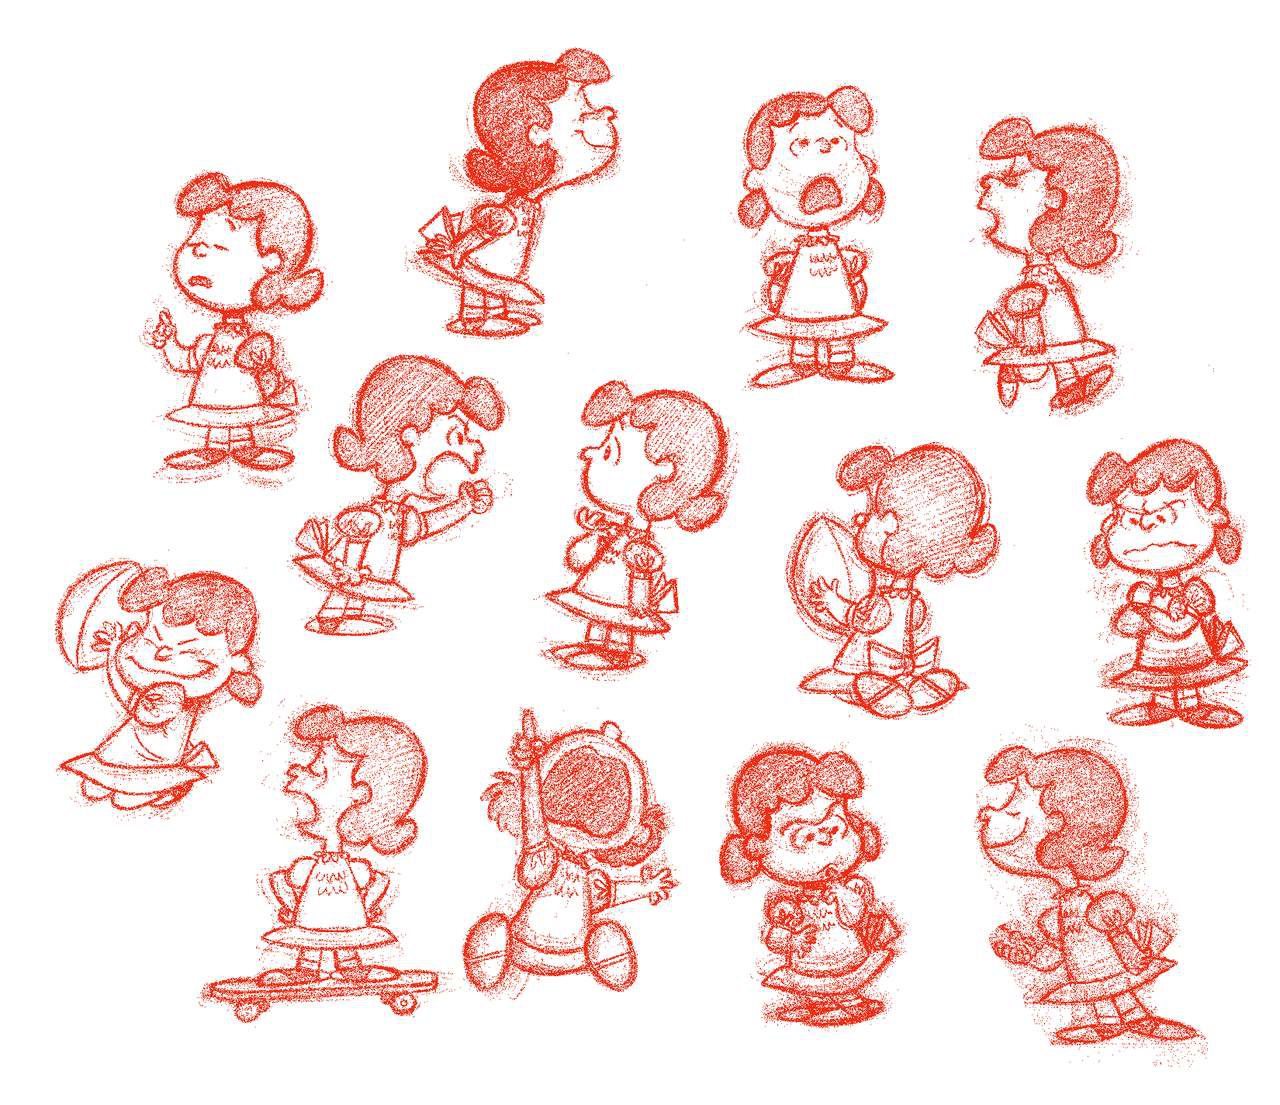 The Art and Making of Peanuts Animation 199